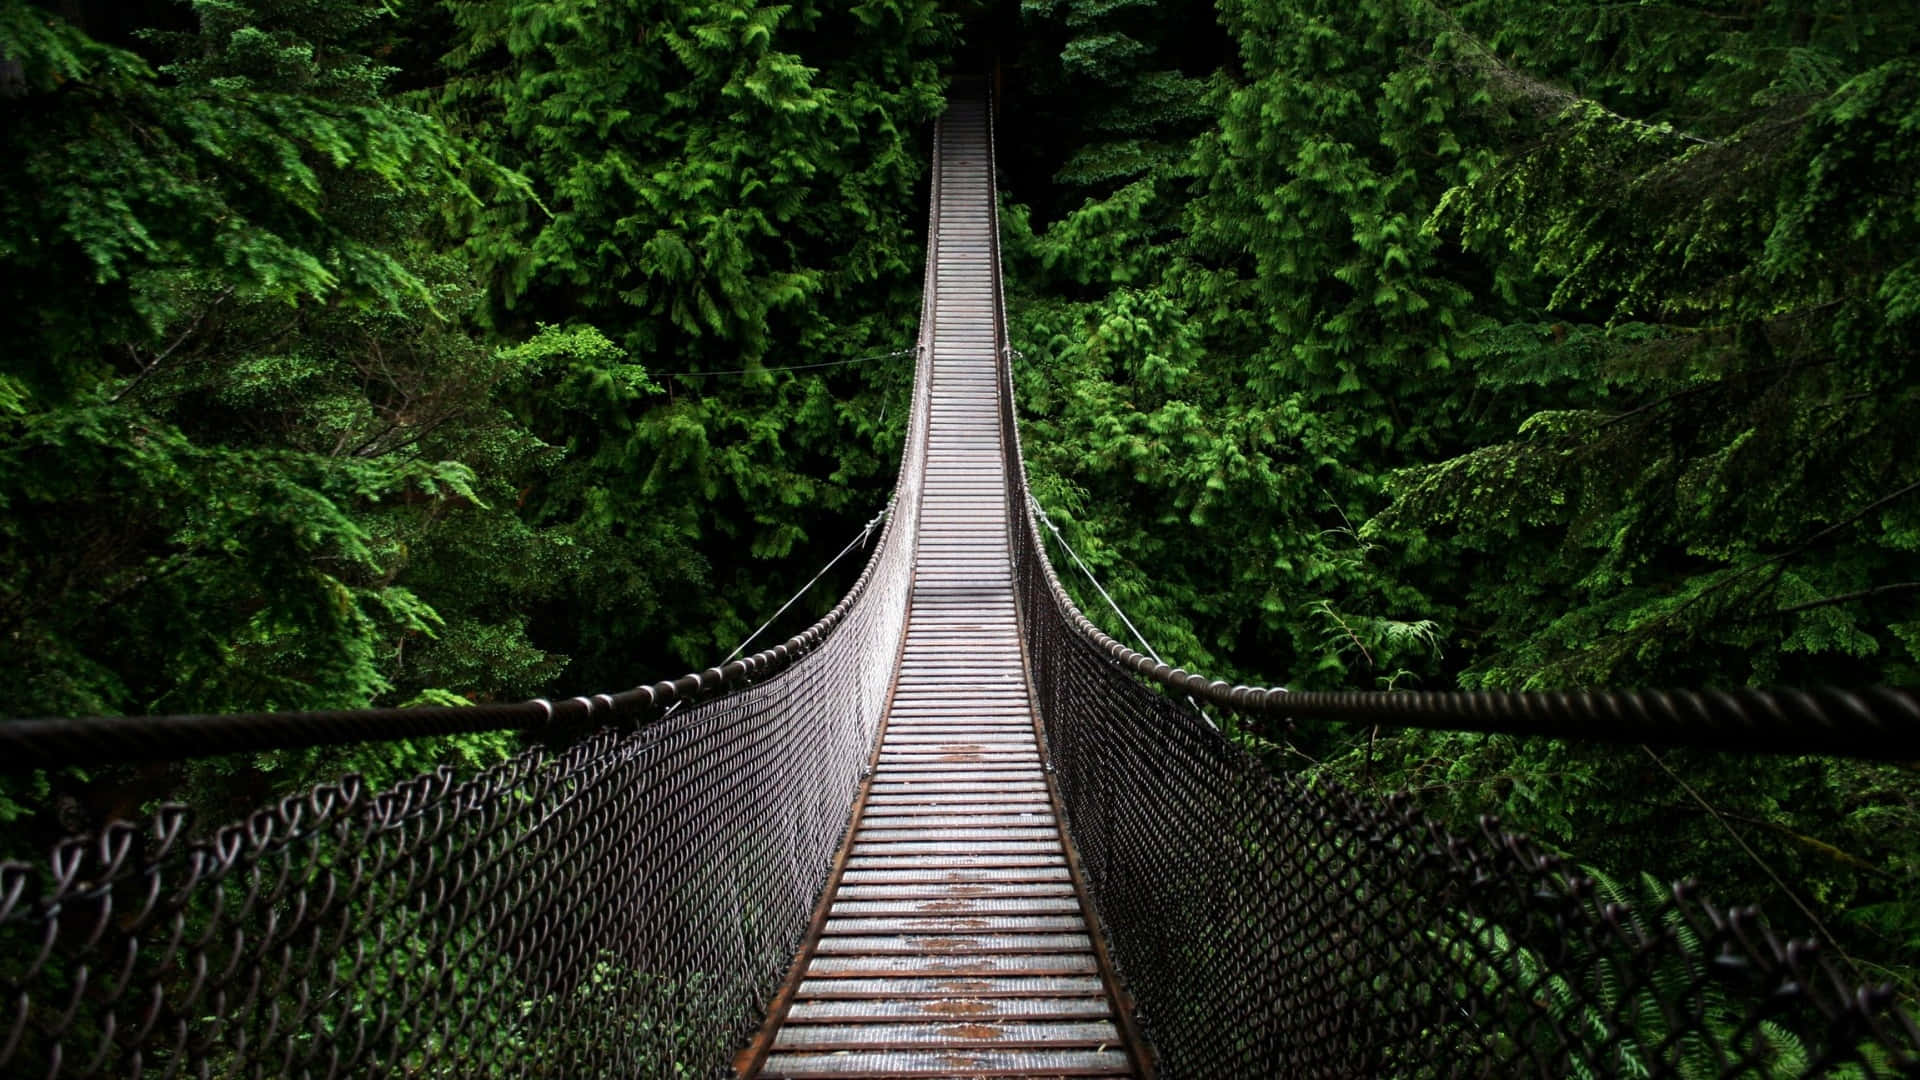 A Suspension Bridge Spanning Over A Forest